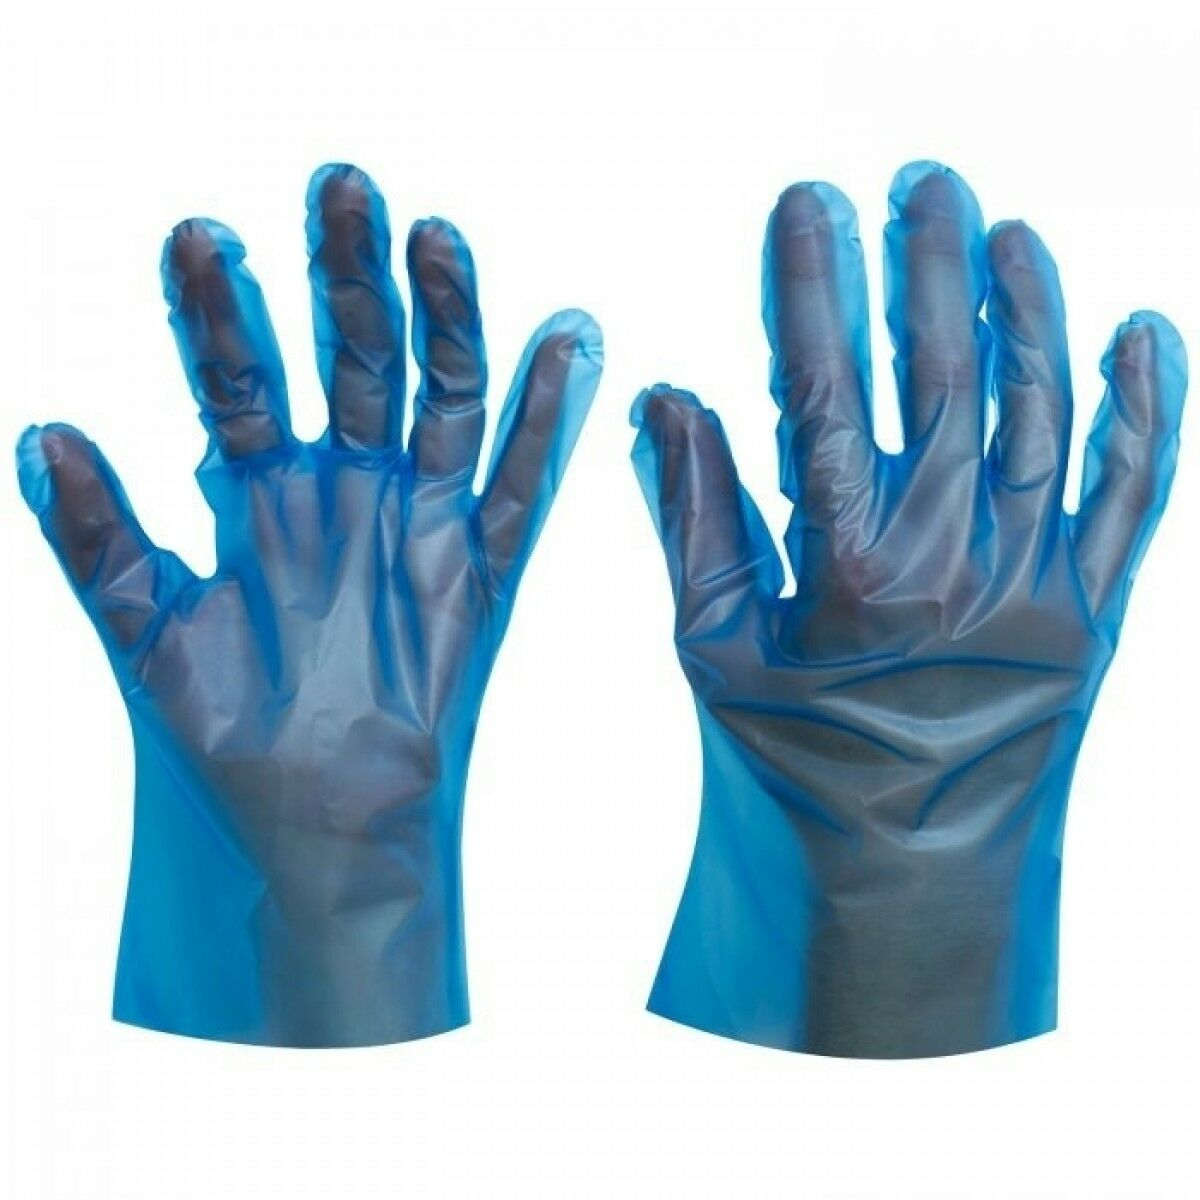 8 Types of TPE Gloves you Can Afford Easily